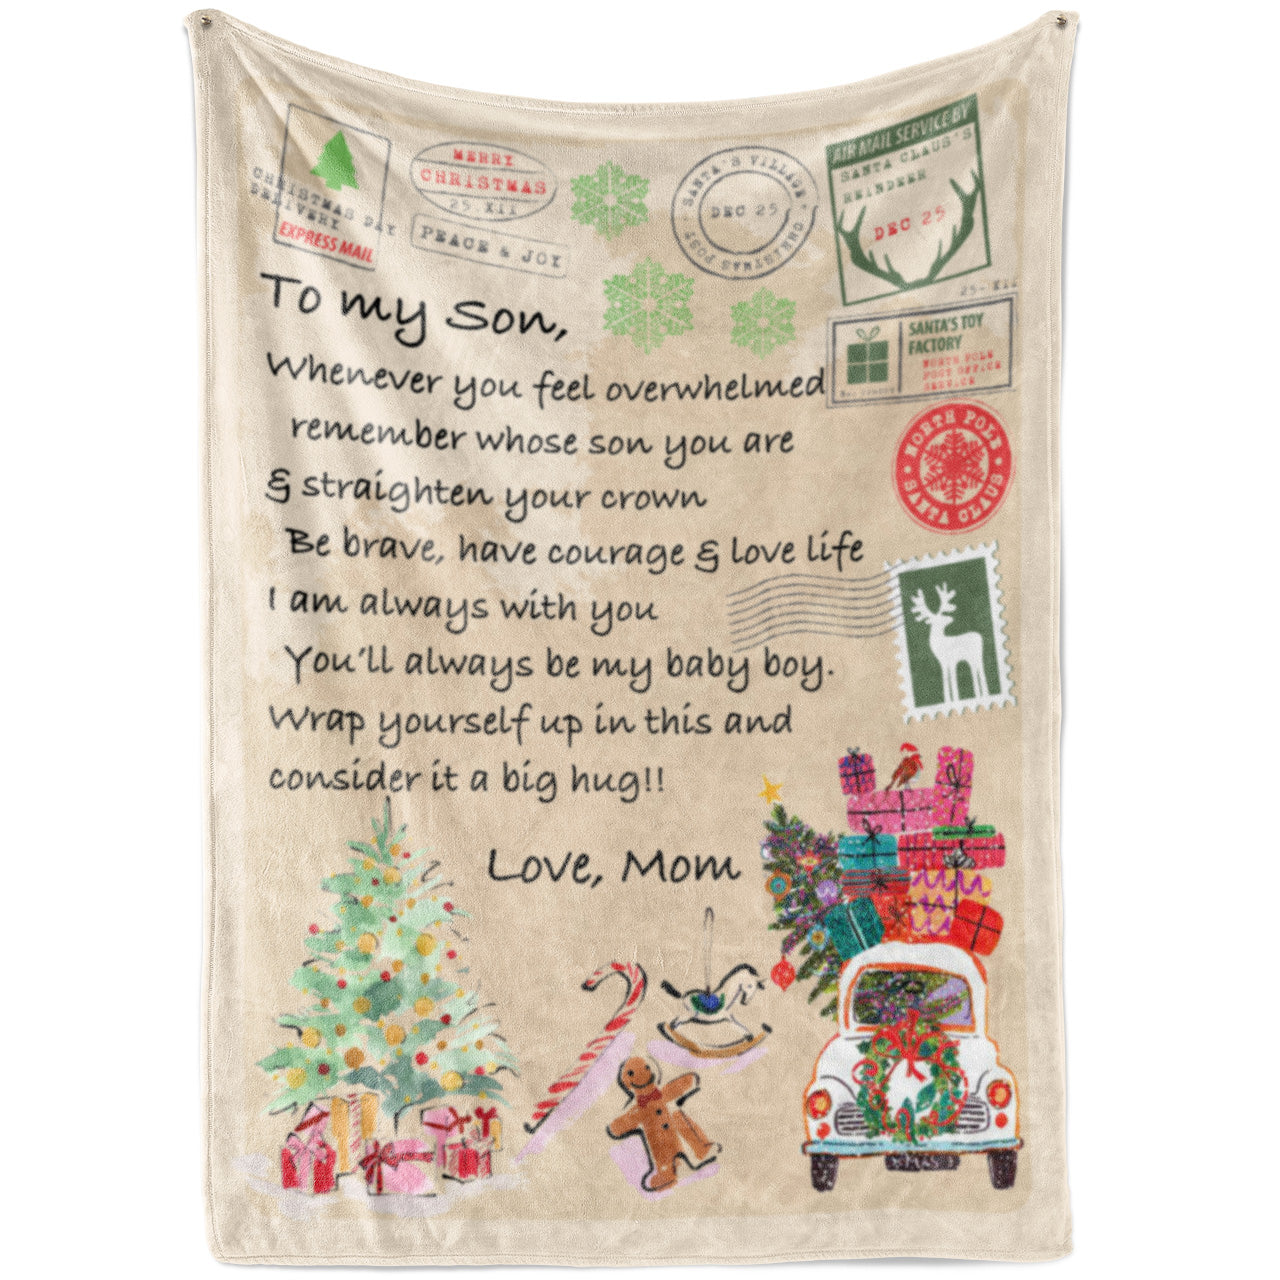 Blanket Gifts For Sons From Mothers, Gifts For 16 Year Old Son, Straighten Your Crown